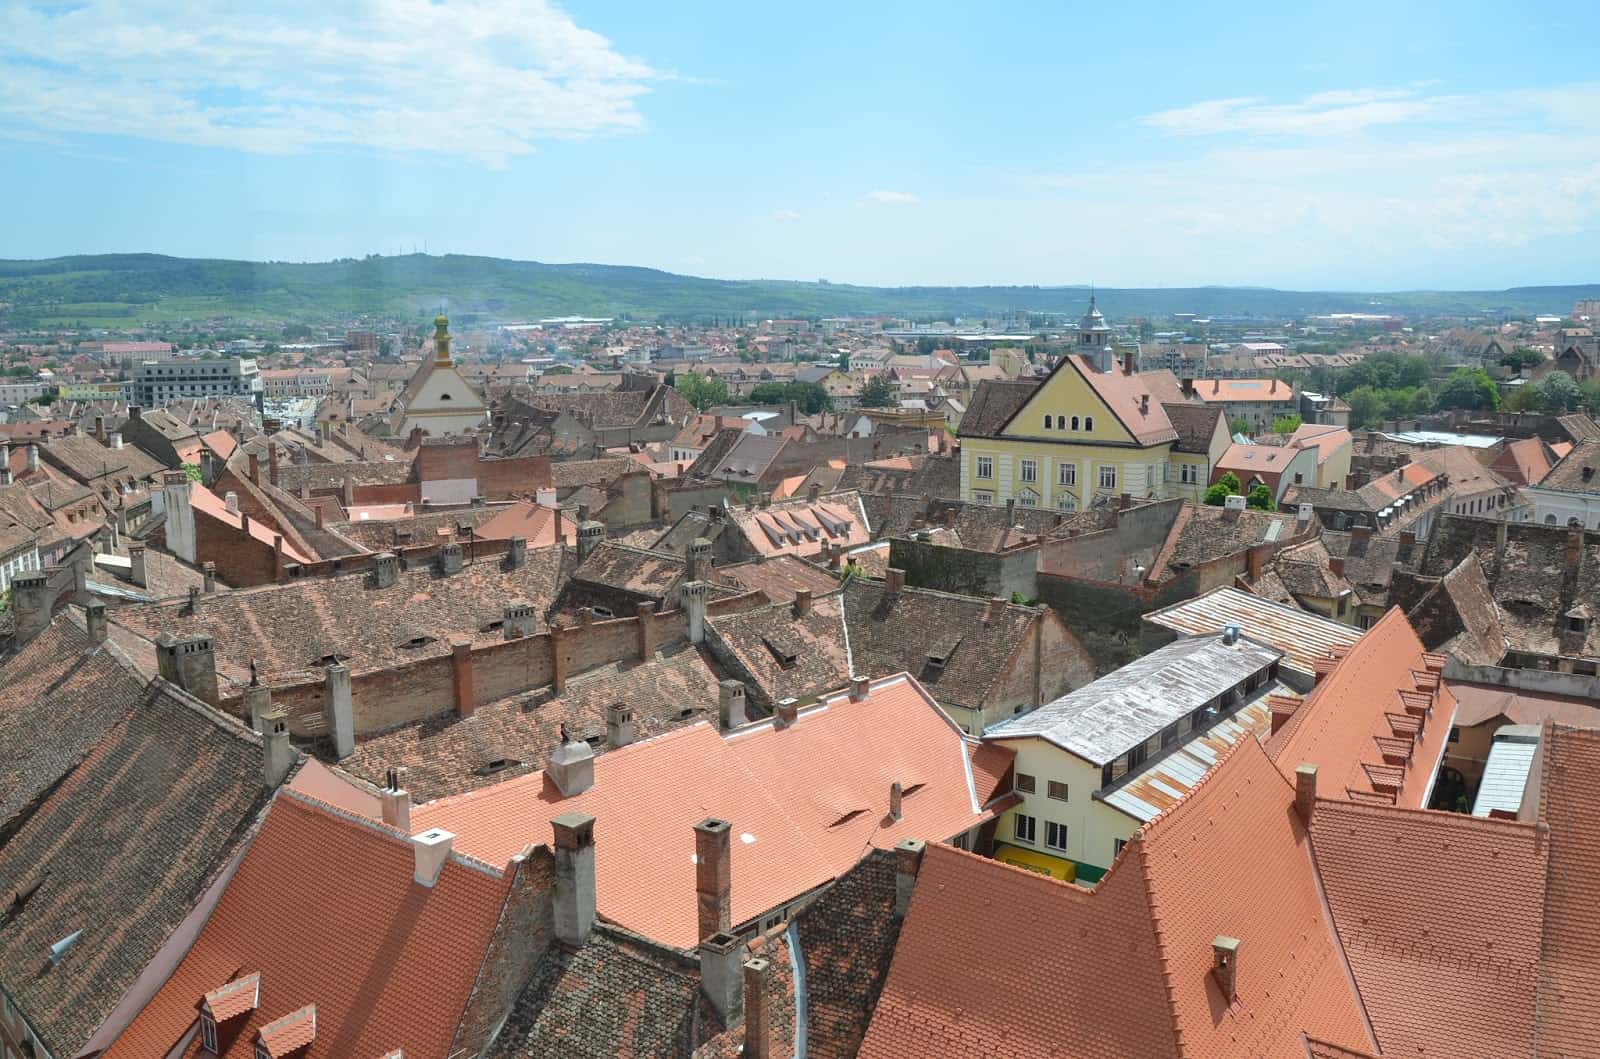 View from Council Tower in Sibiu, Romania